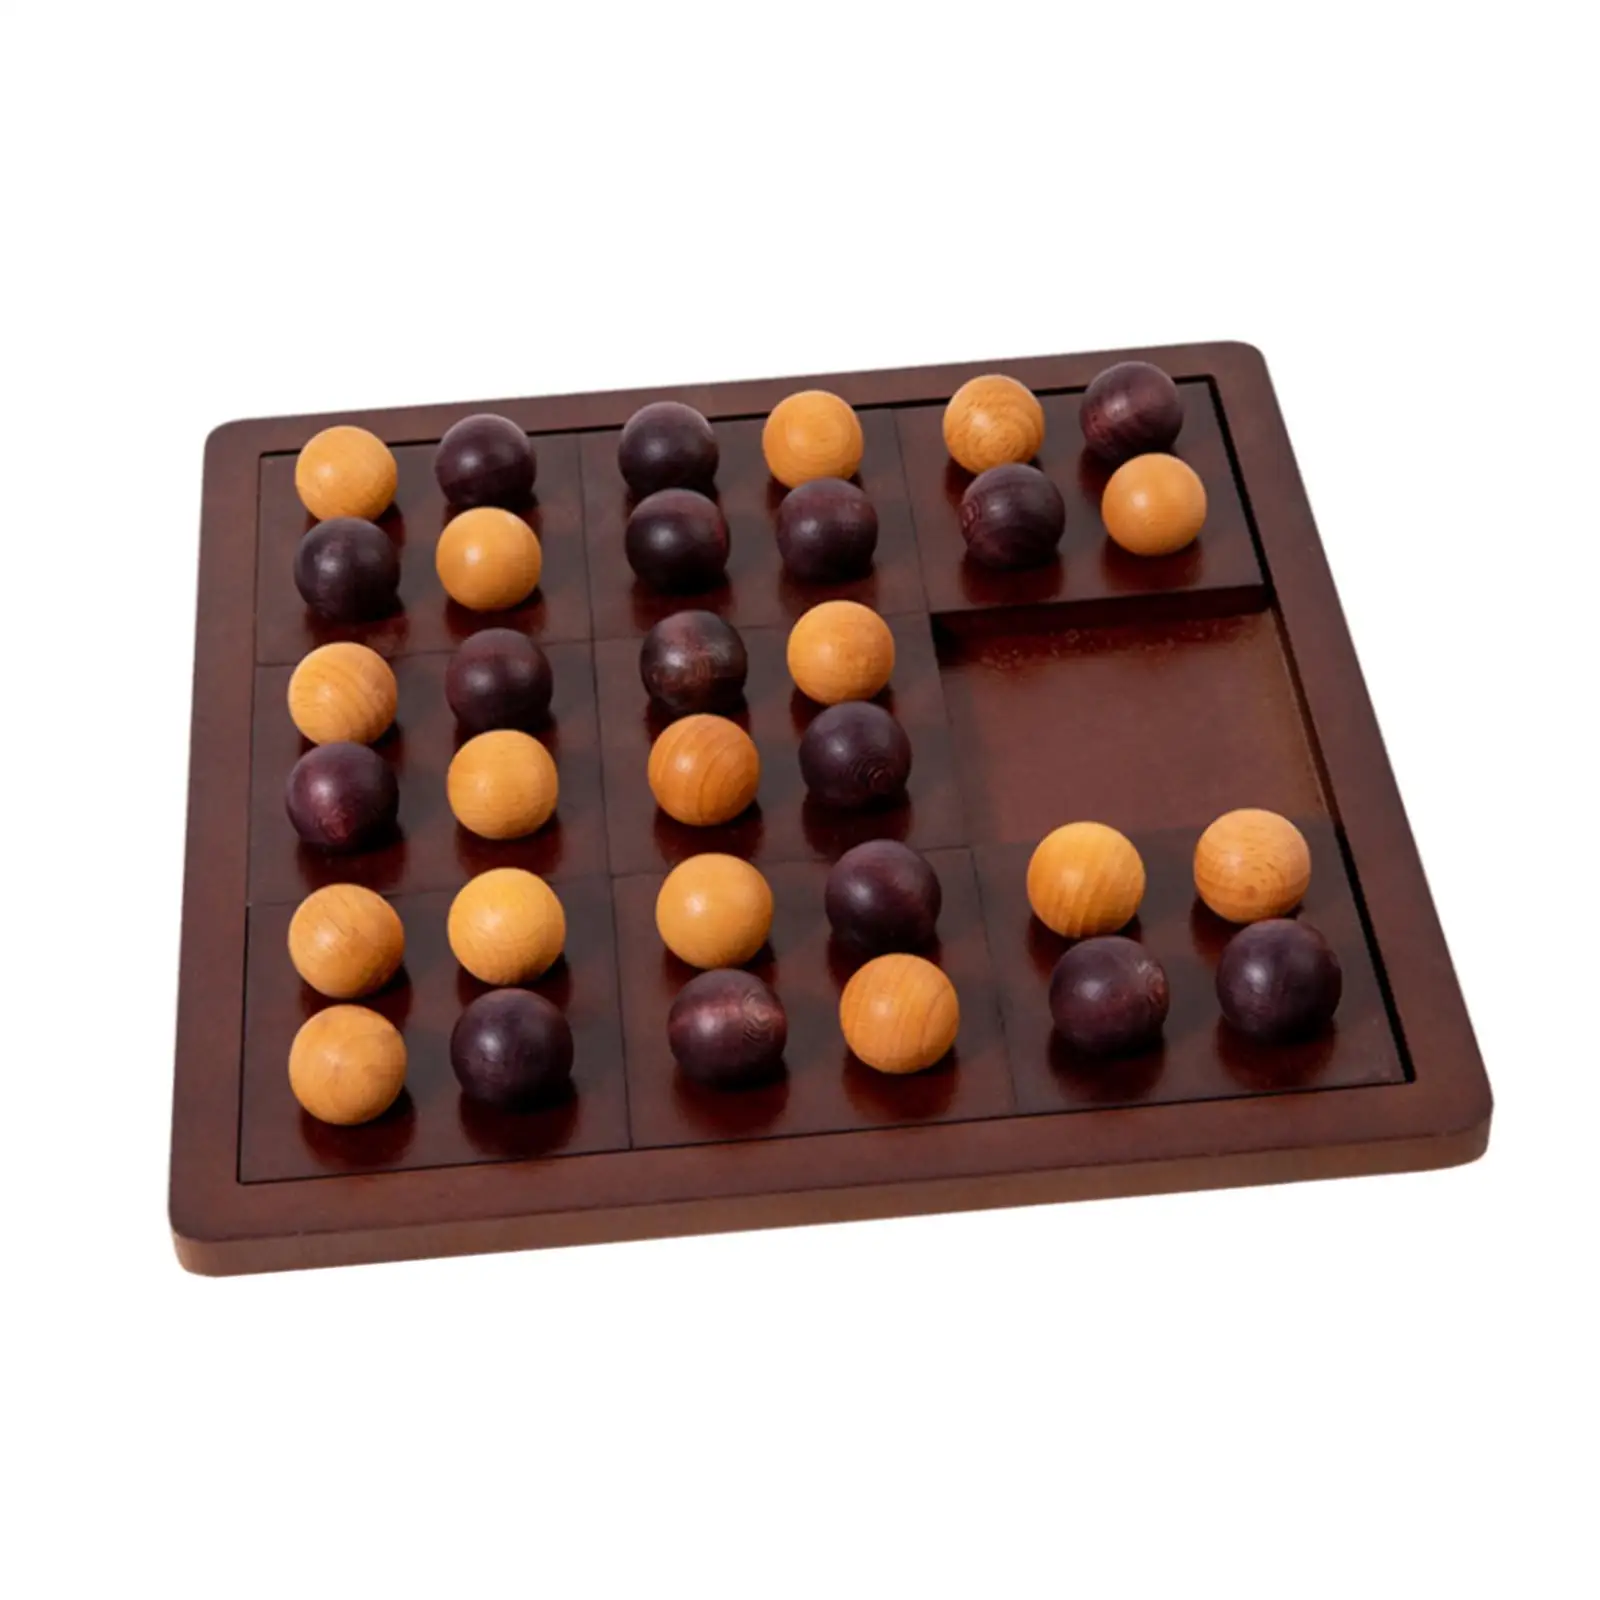 Tic TAC Toe Game Leisure Intelligent Classical Handmade Early Education Puzzle for Adult Indoor Outdoor Gifts Travel Plane Trips